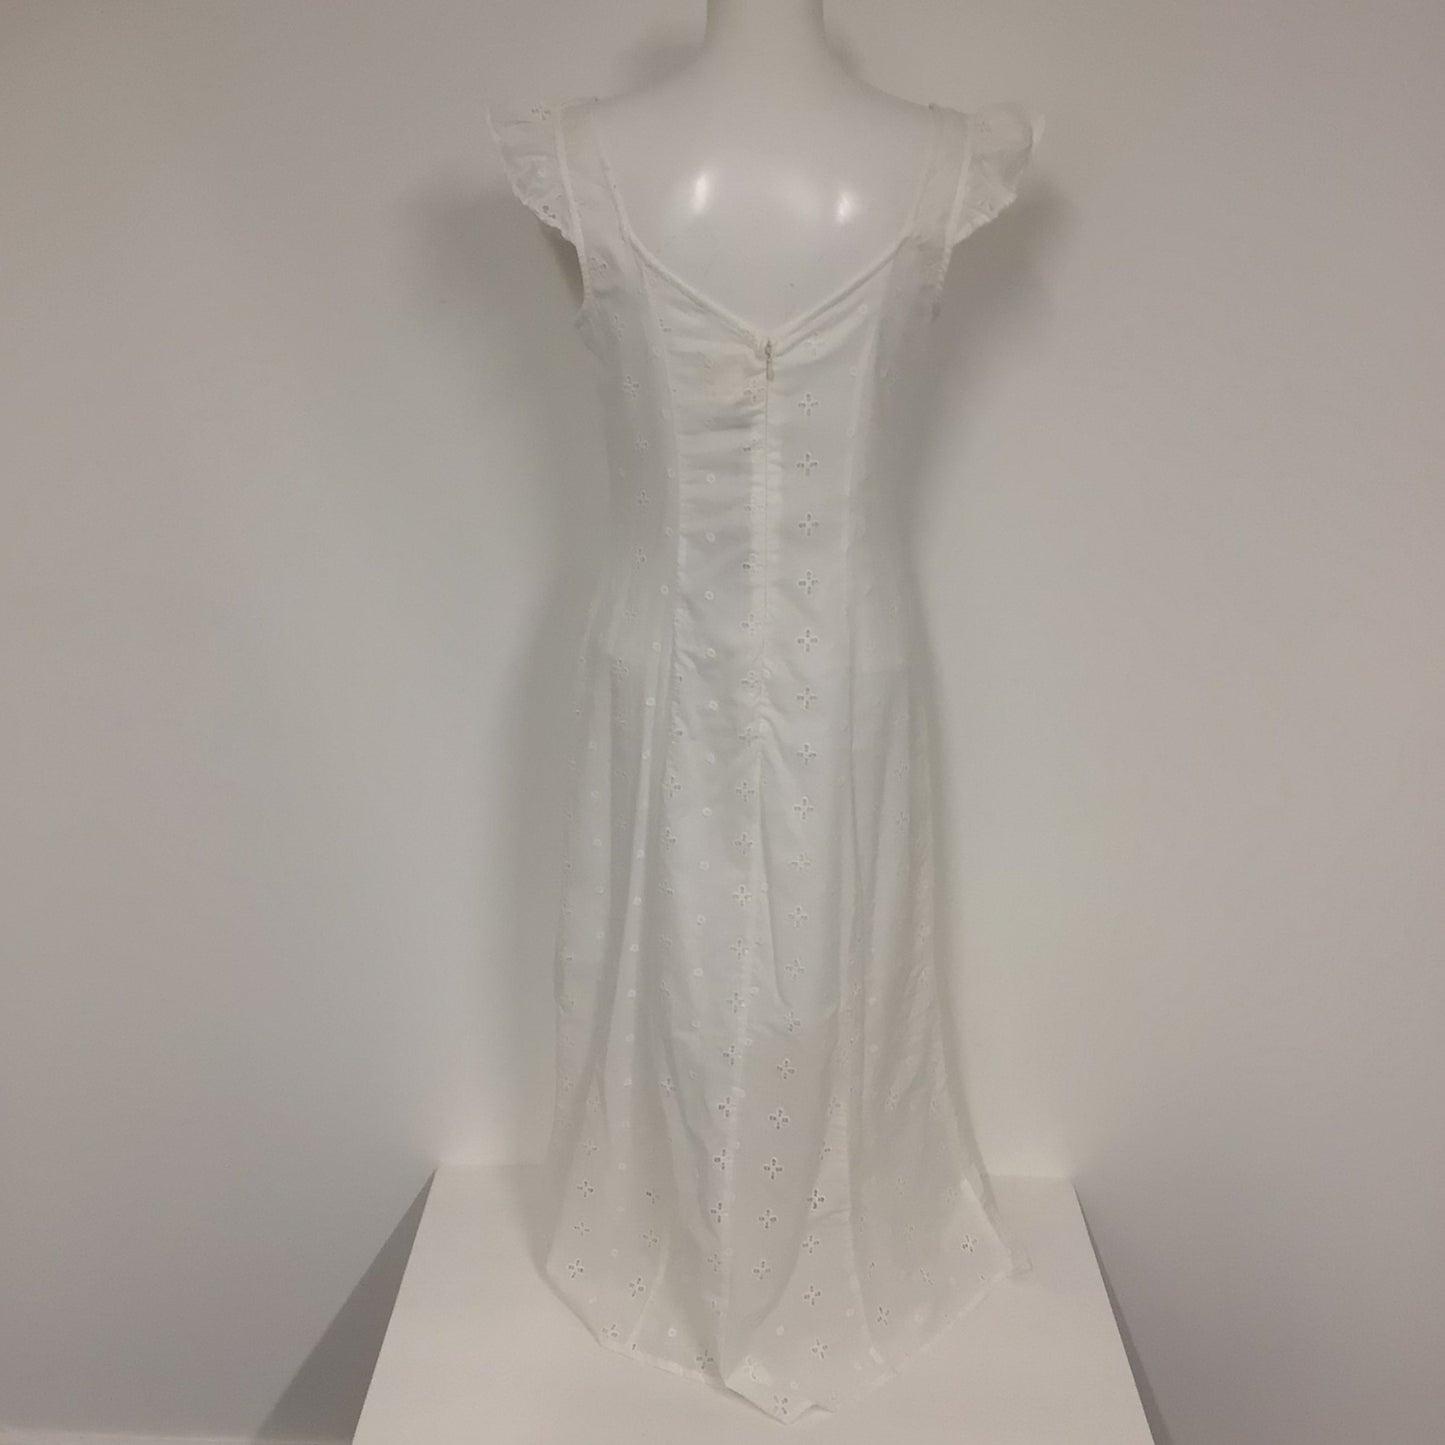 BNWT River Island In Other Words White Long Embroidered Dress 100% Cotton Size 10